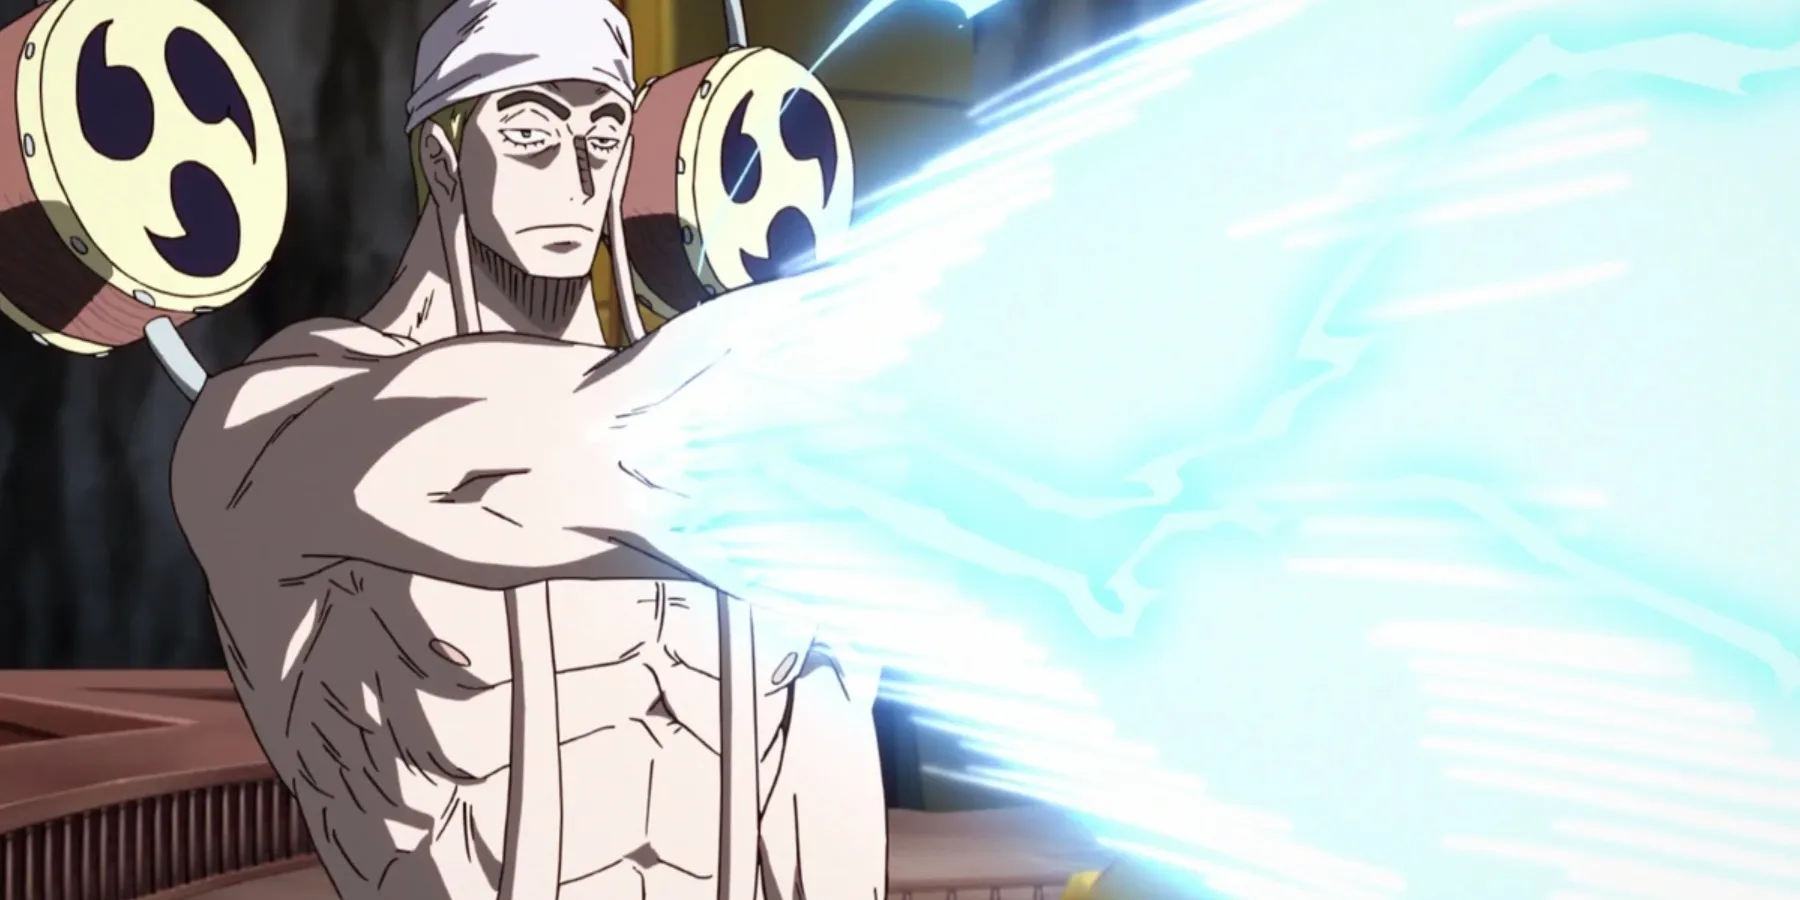 Enel Colpisce Luffy con il Fulmine in One Piece